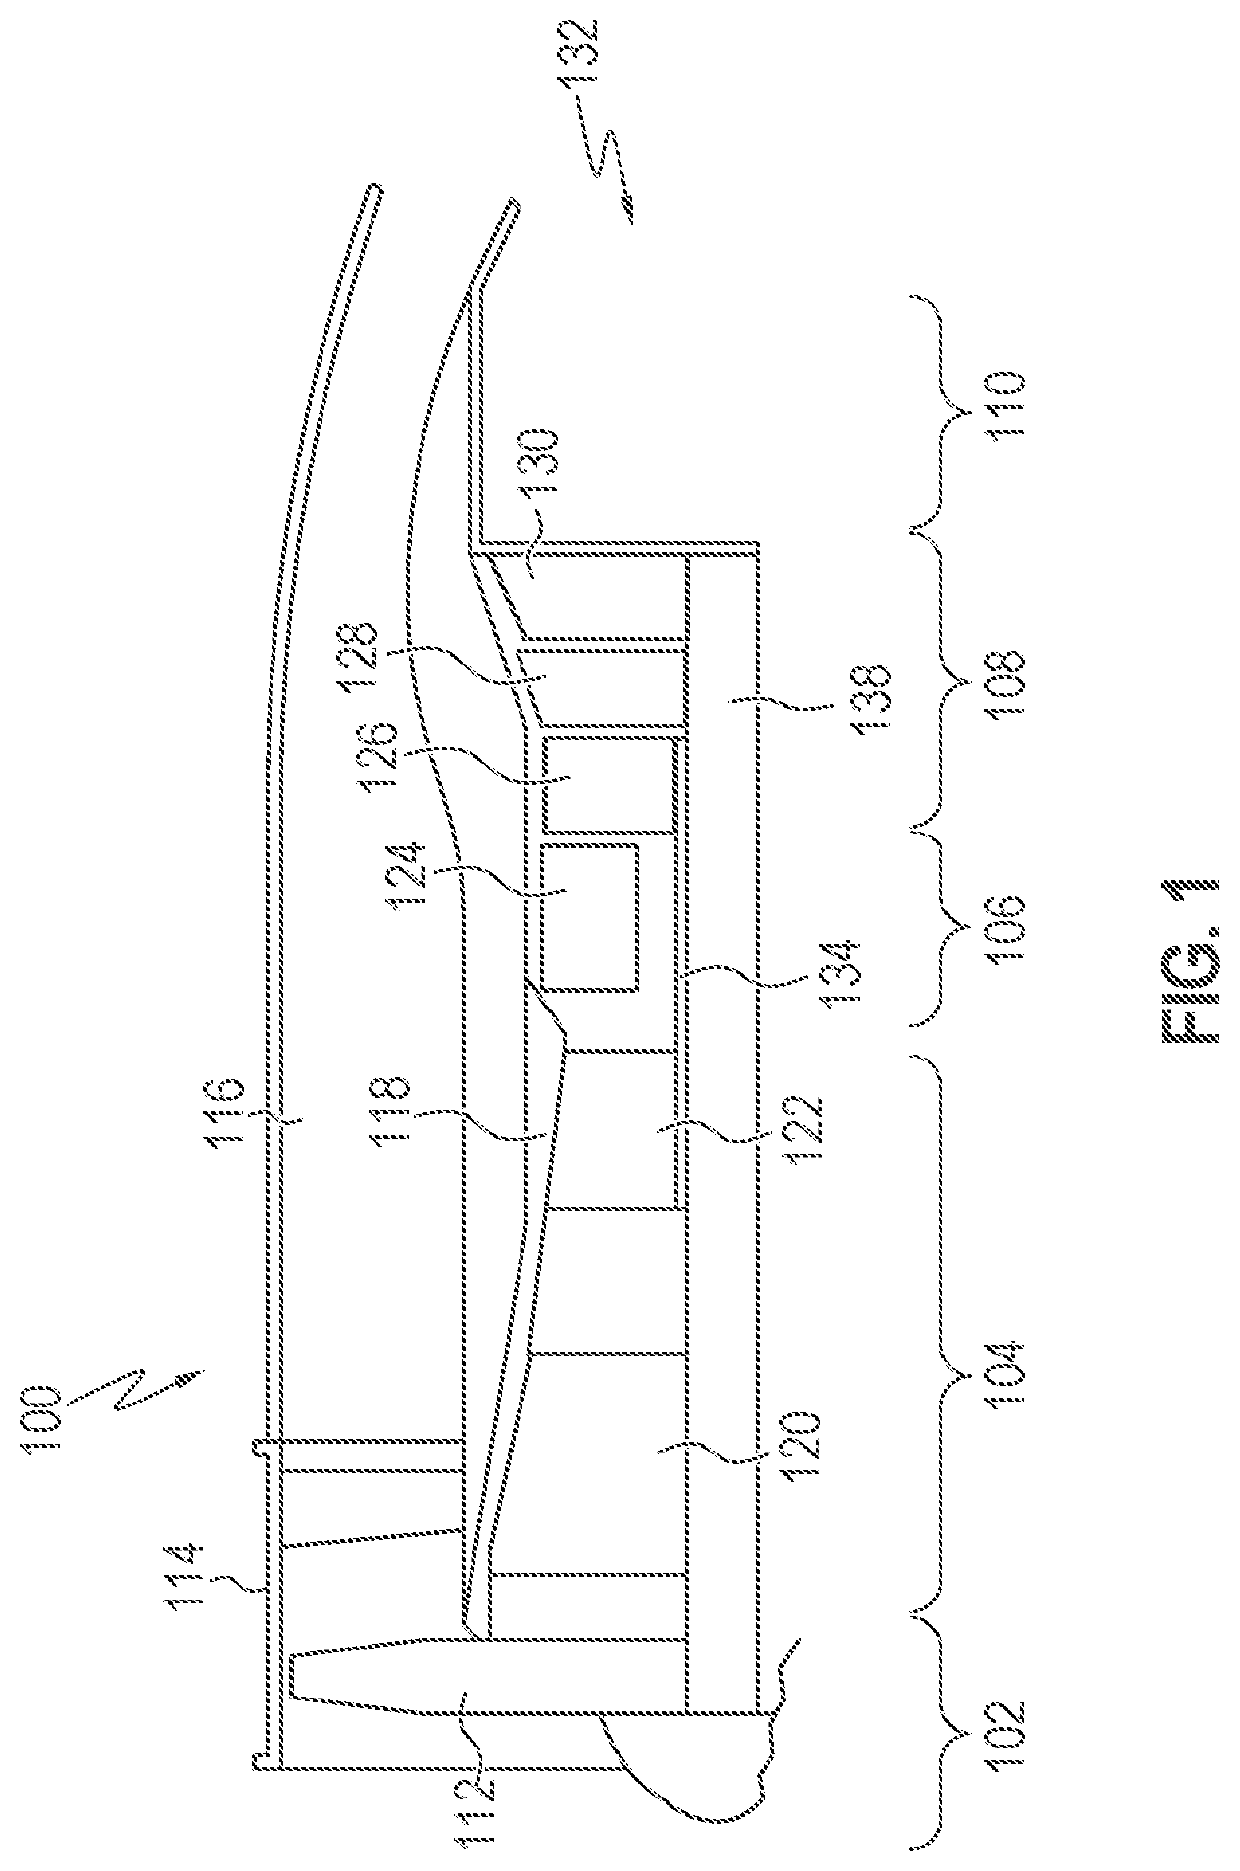 System and method for air injection passageway integration and optimization in turbomachinery